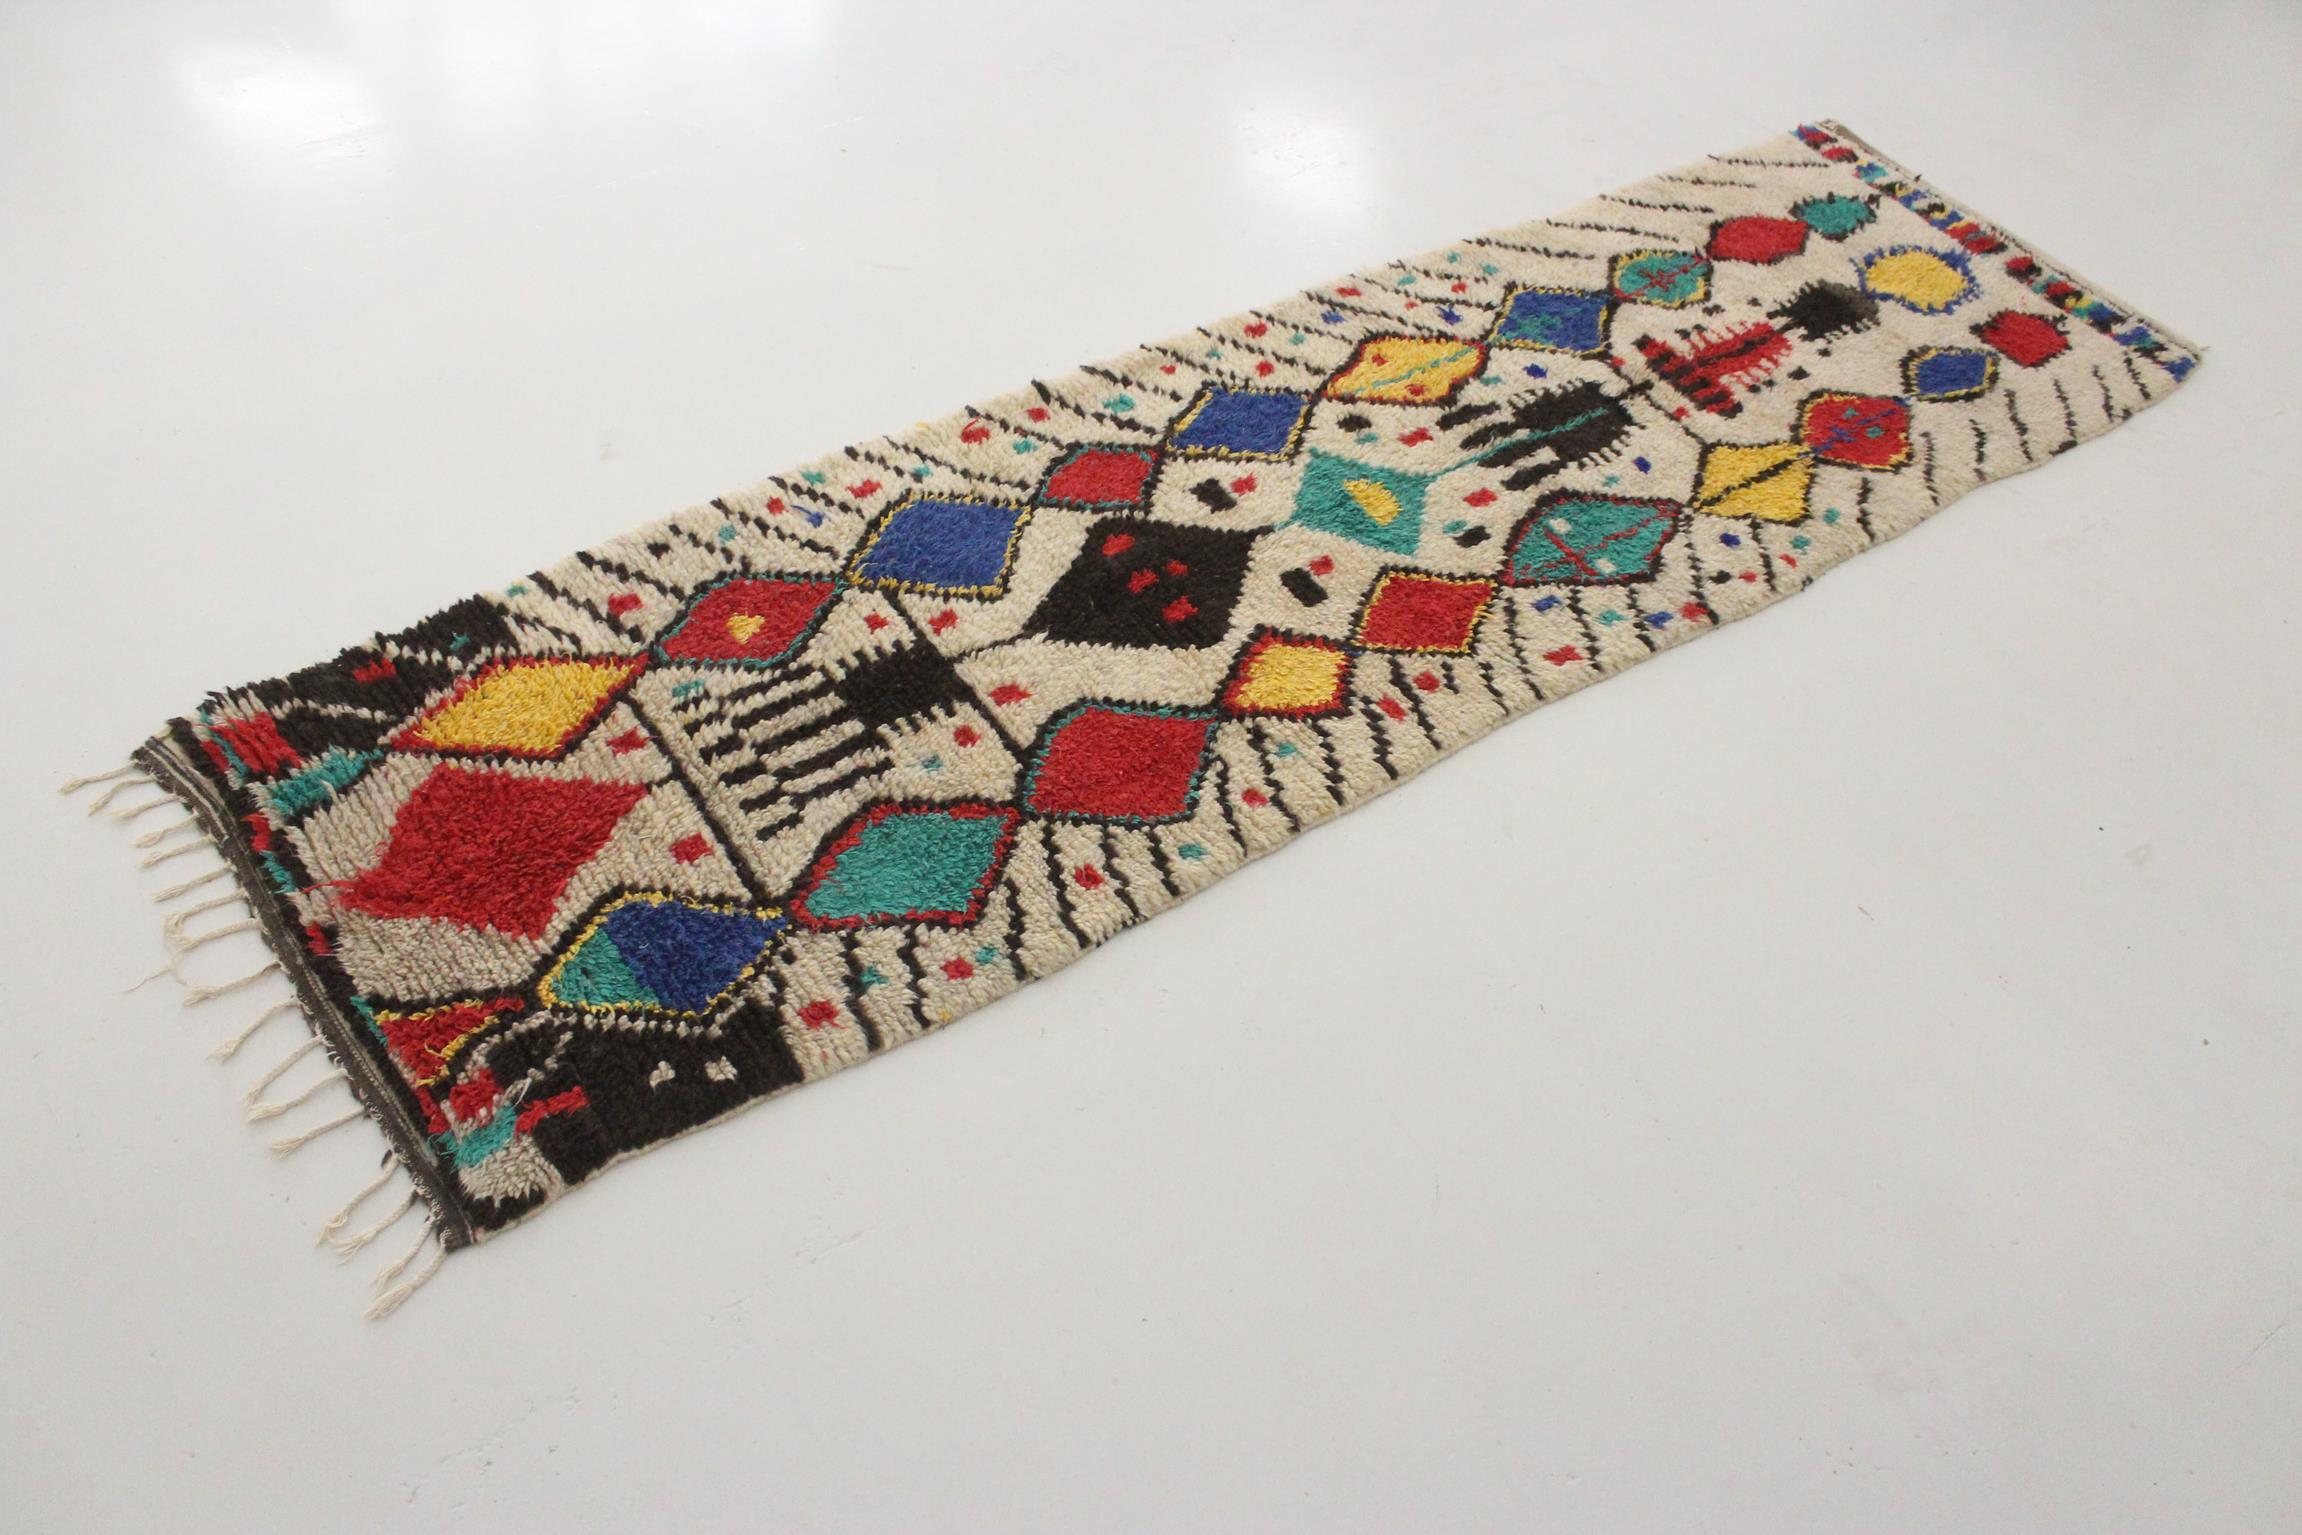 Hand-Woven Vintage Moroccan Azilal runner rug - 3.1x11.3feet / 95x345cm For Sale